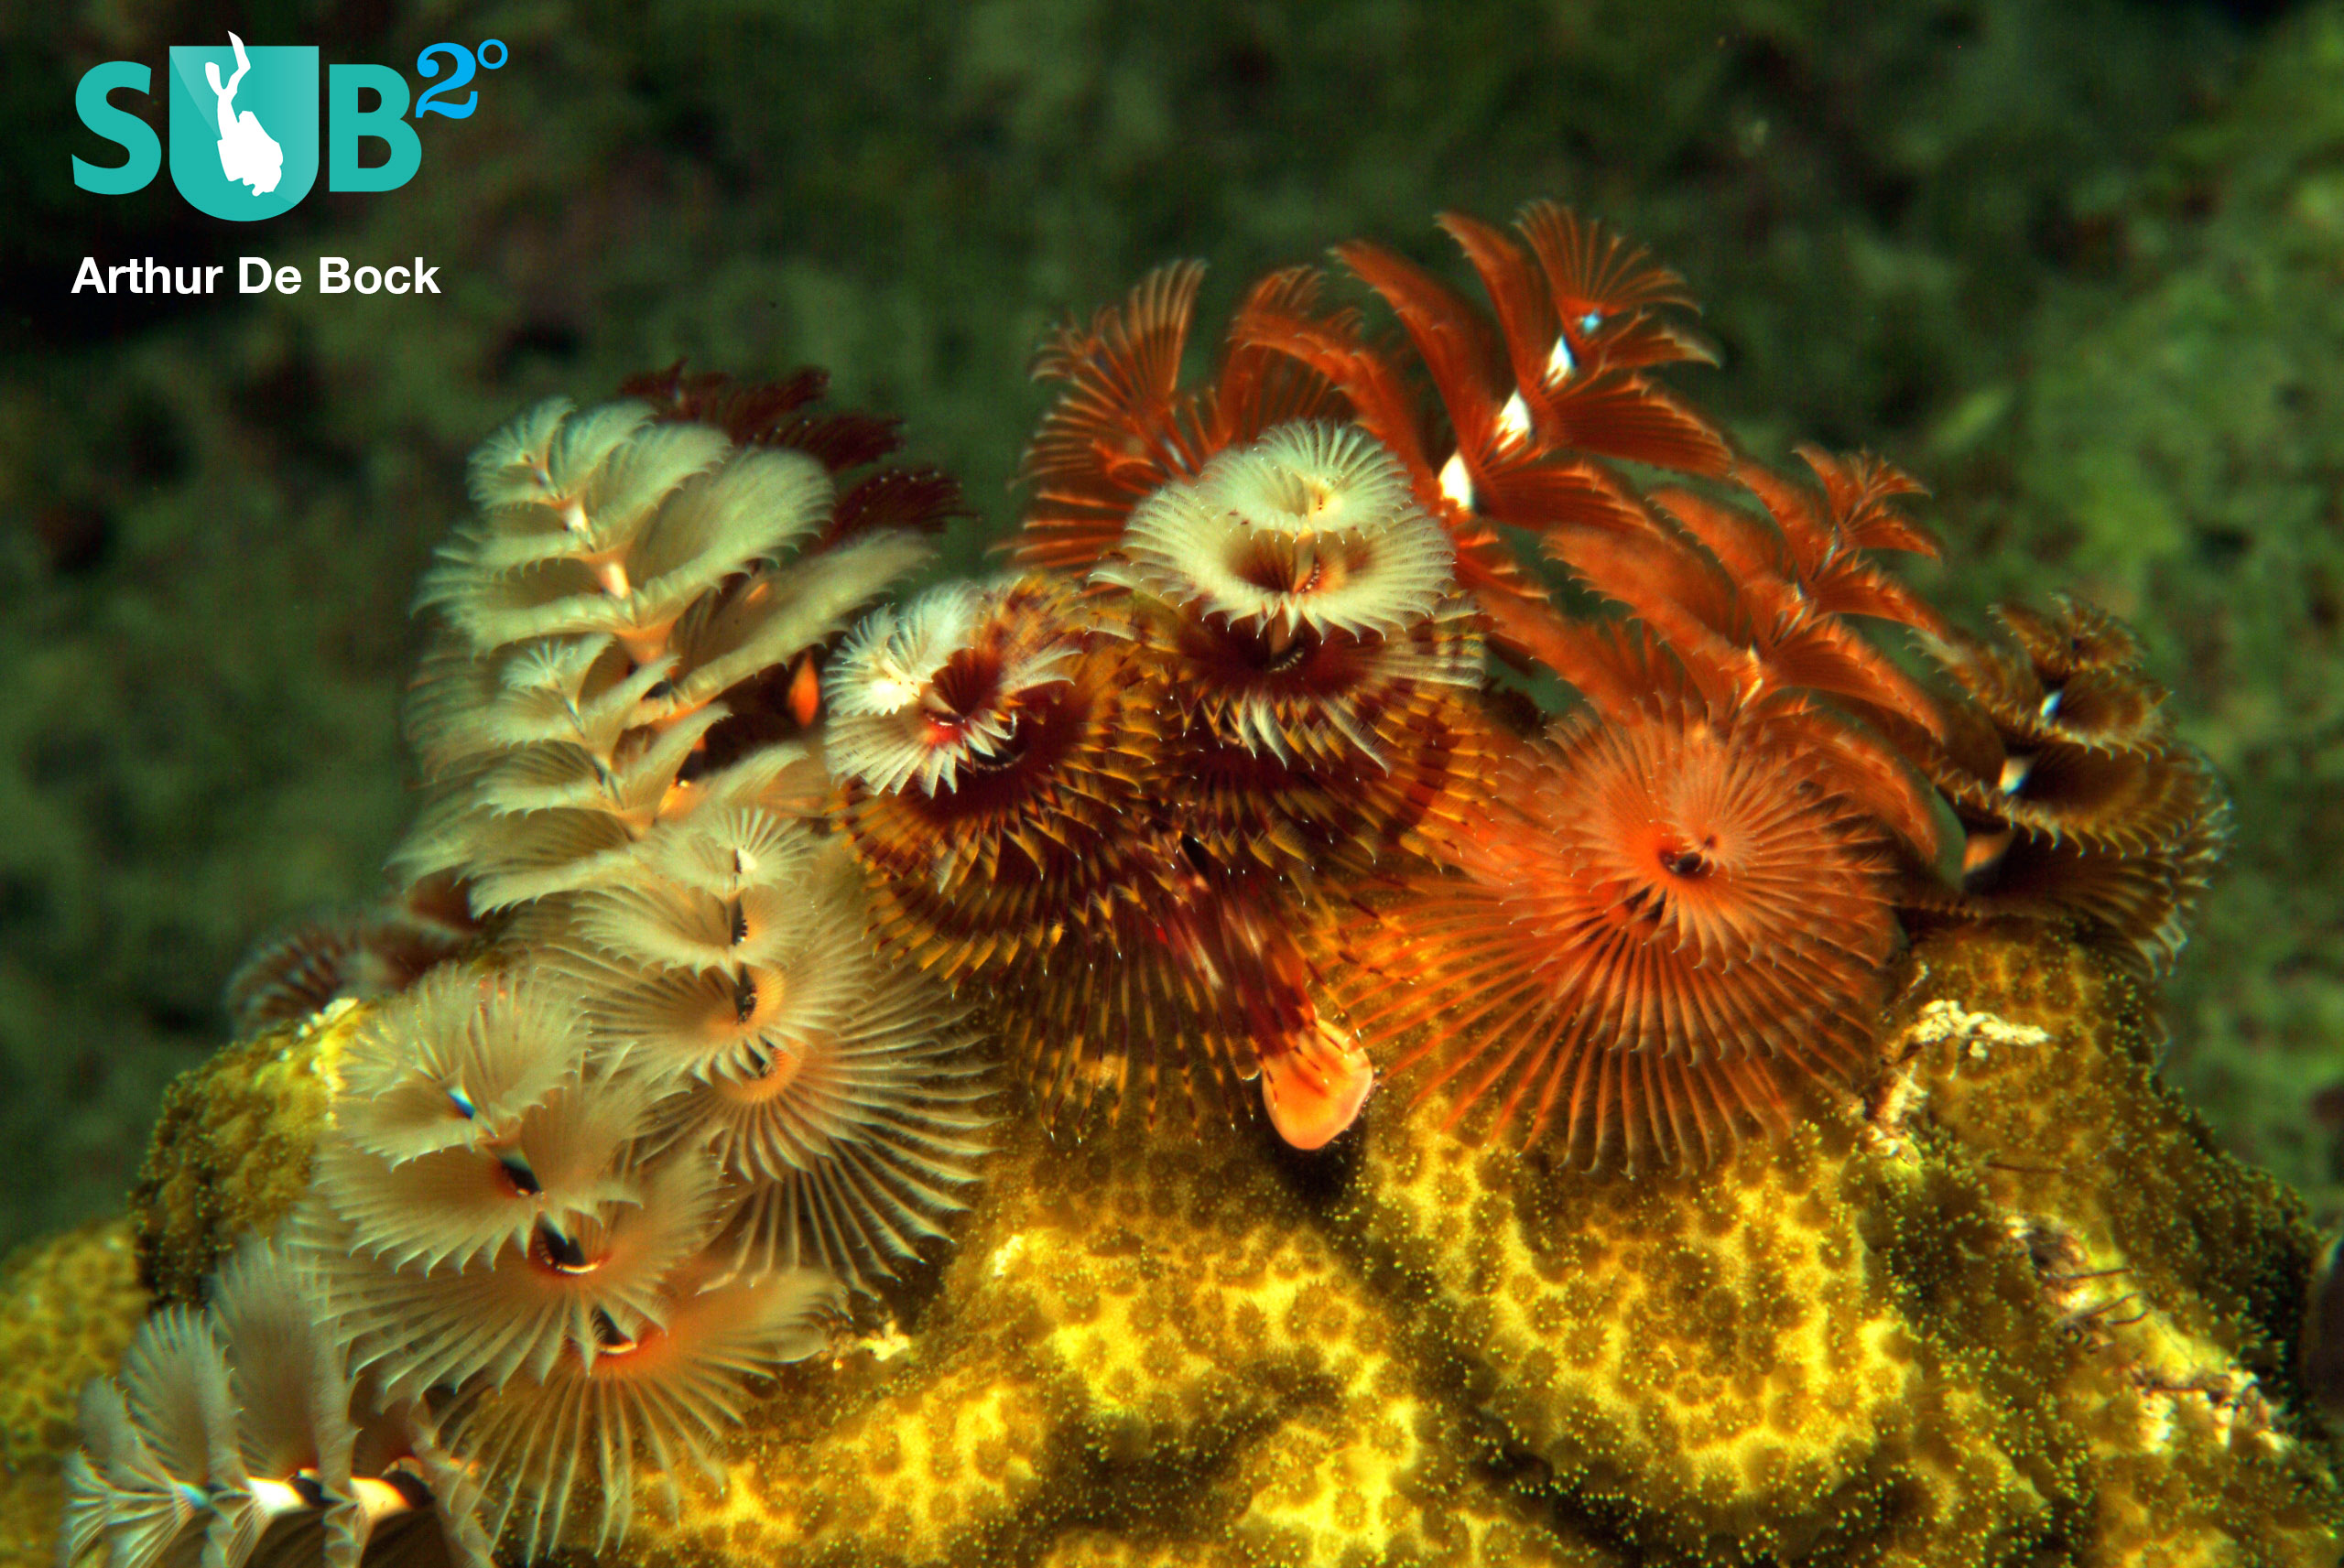 A coral reef just wouldn't be the same without Christmas Tree Worms (Spirobranchus giganteus). 